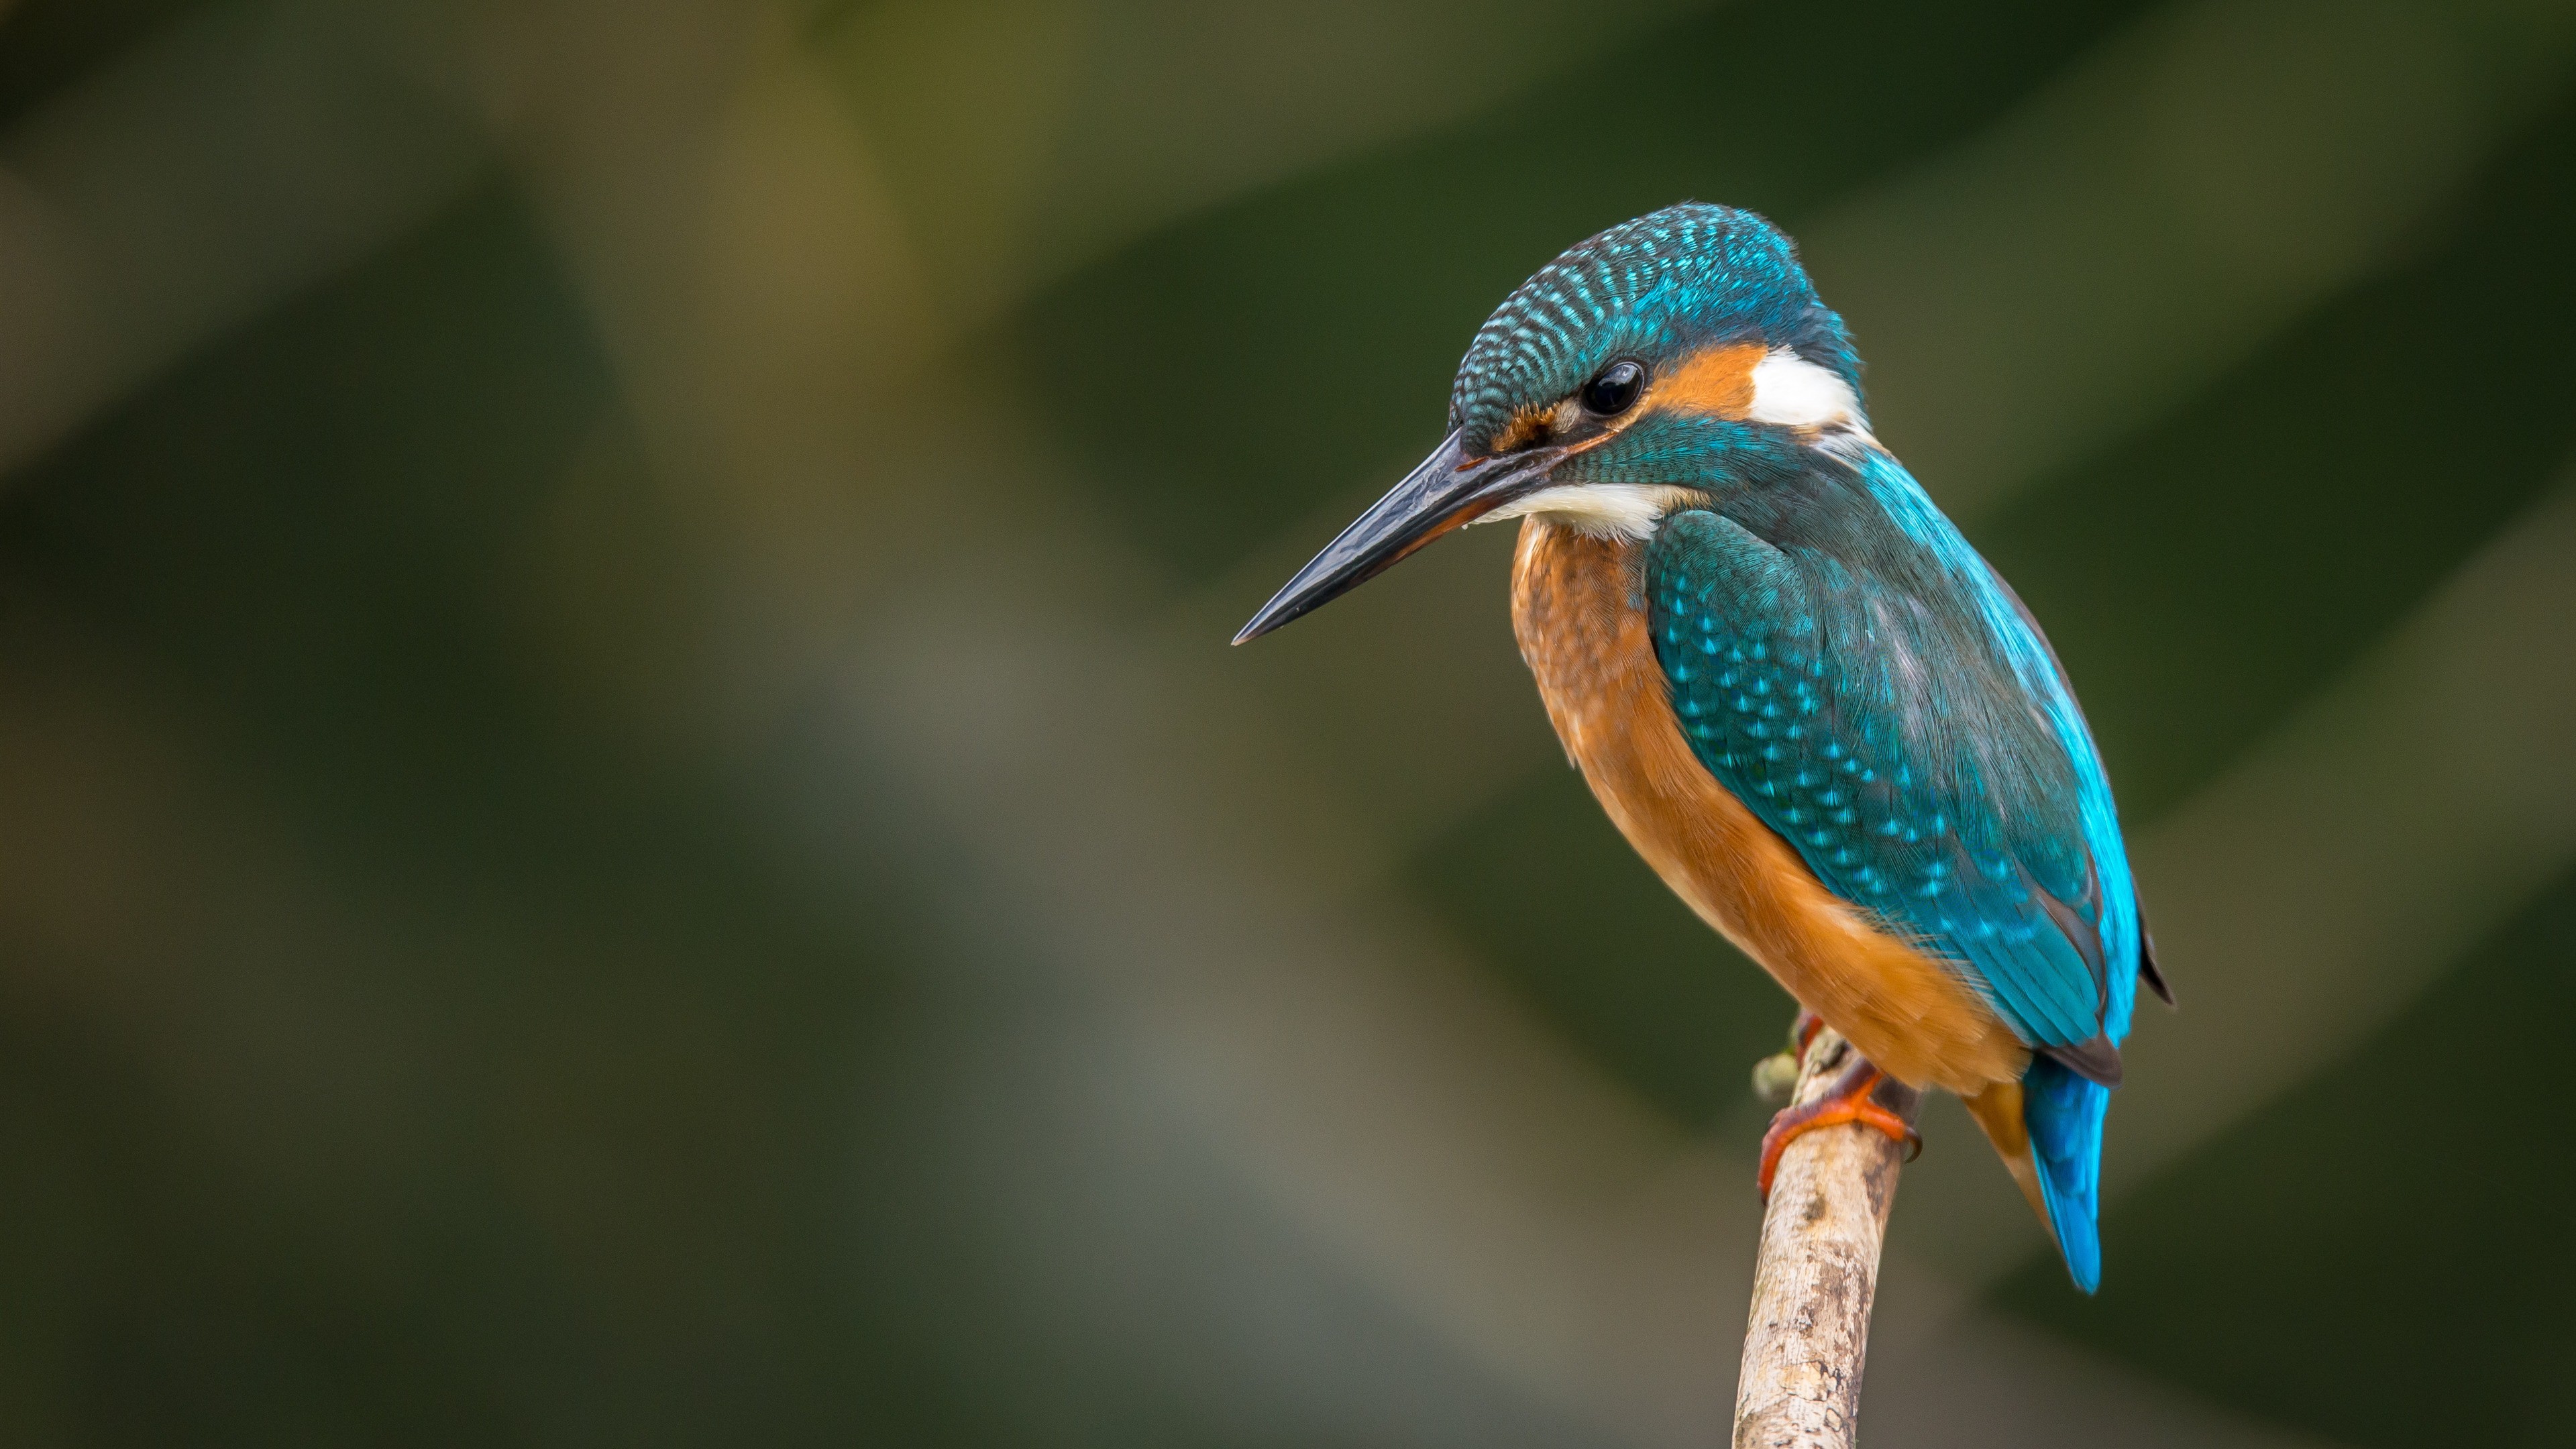 Colorful Kingfisher Bird On Branch 4k Wallpapers